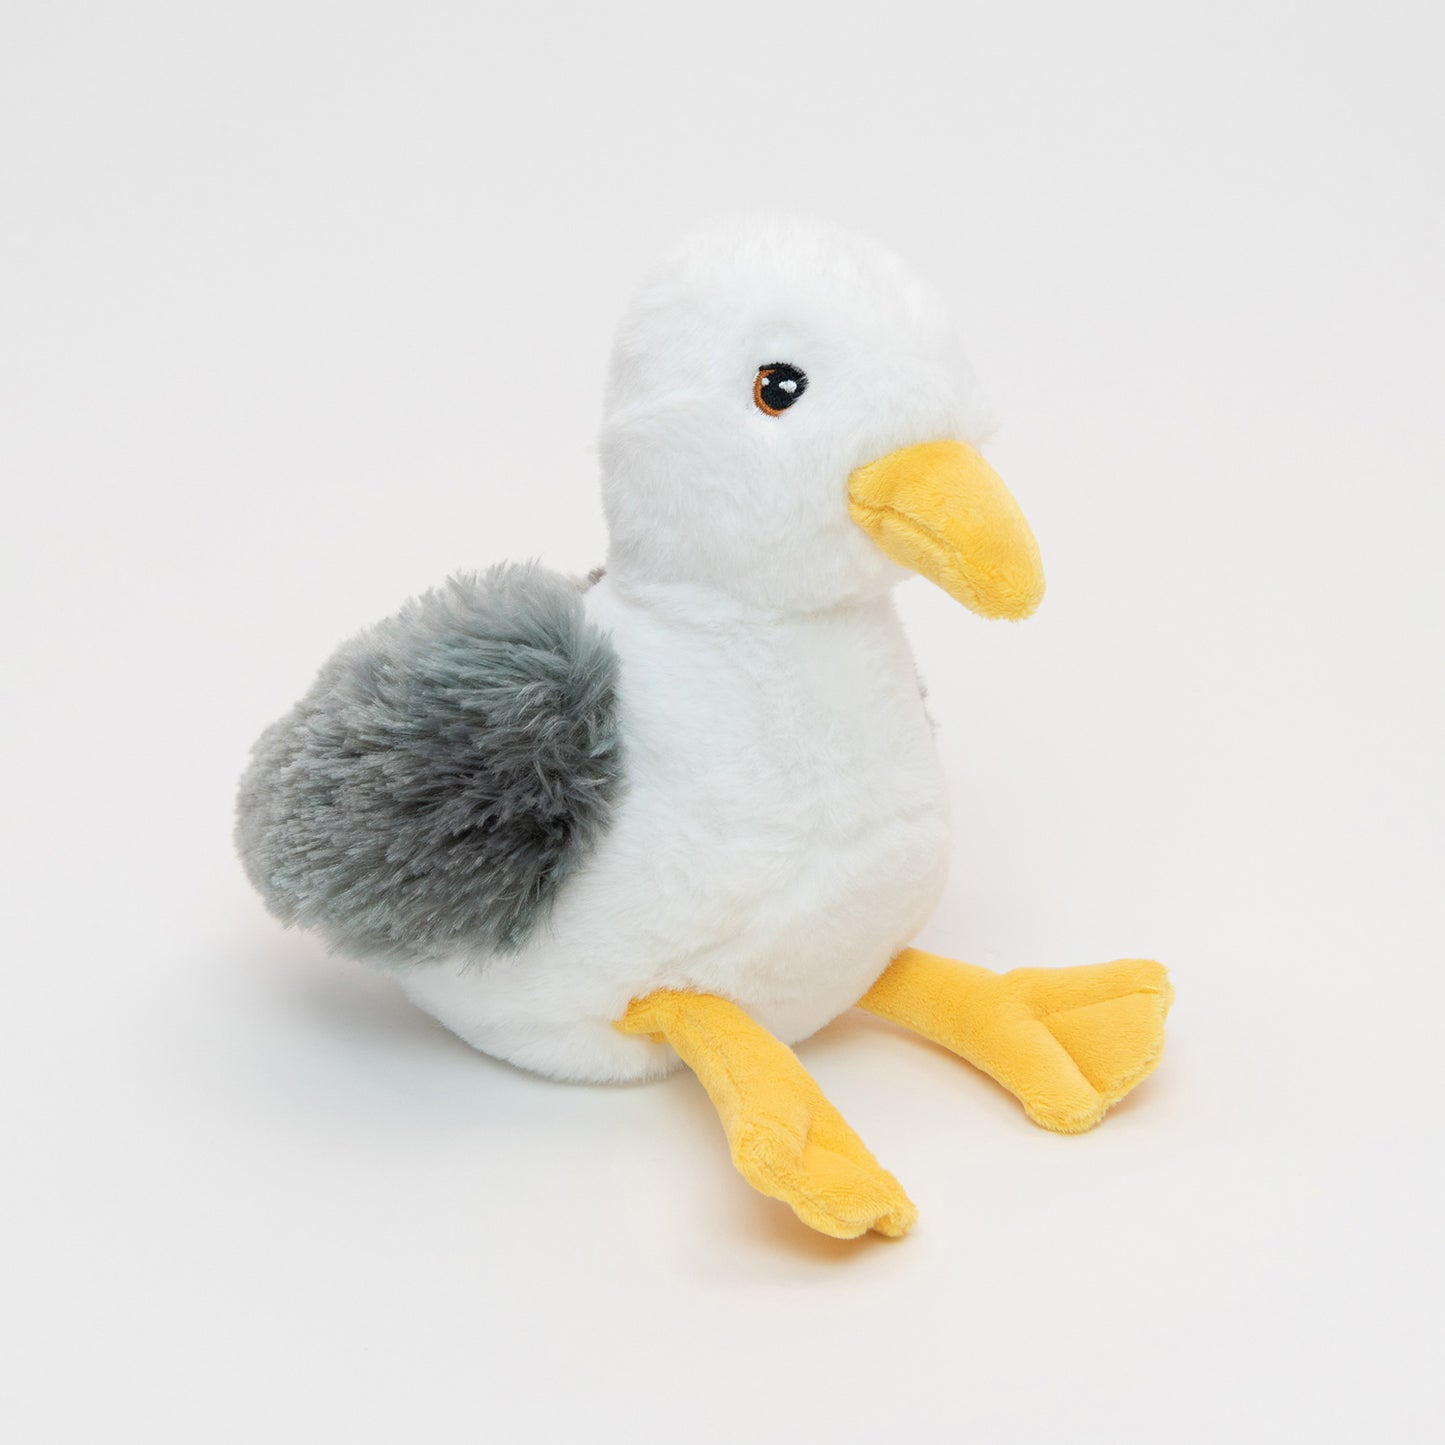 A plush seagull pictured on a white background.